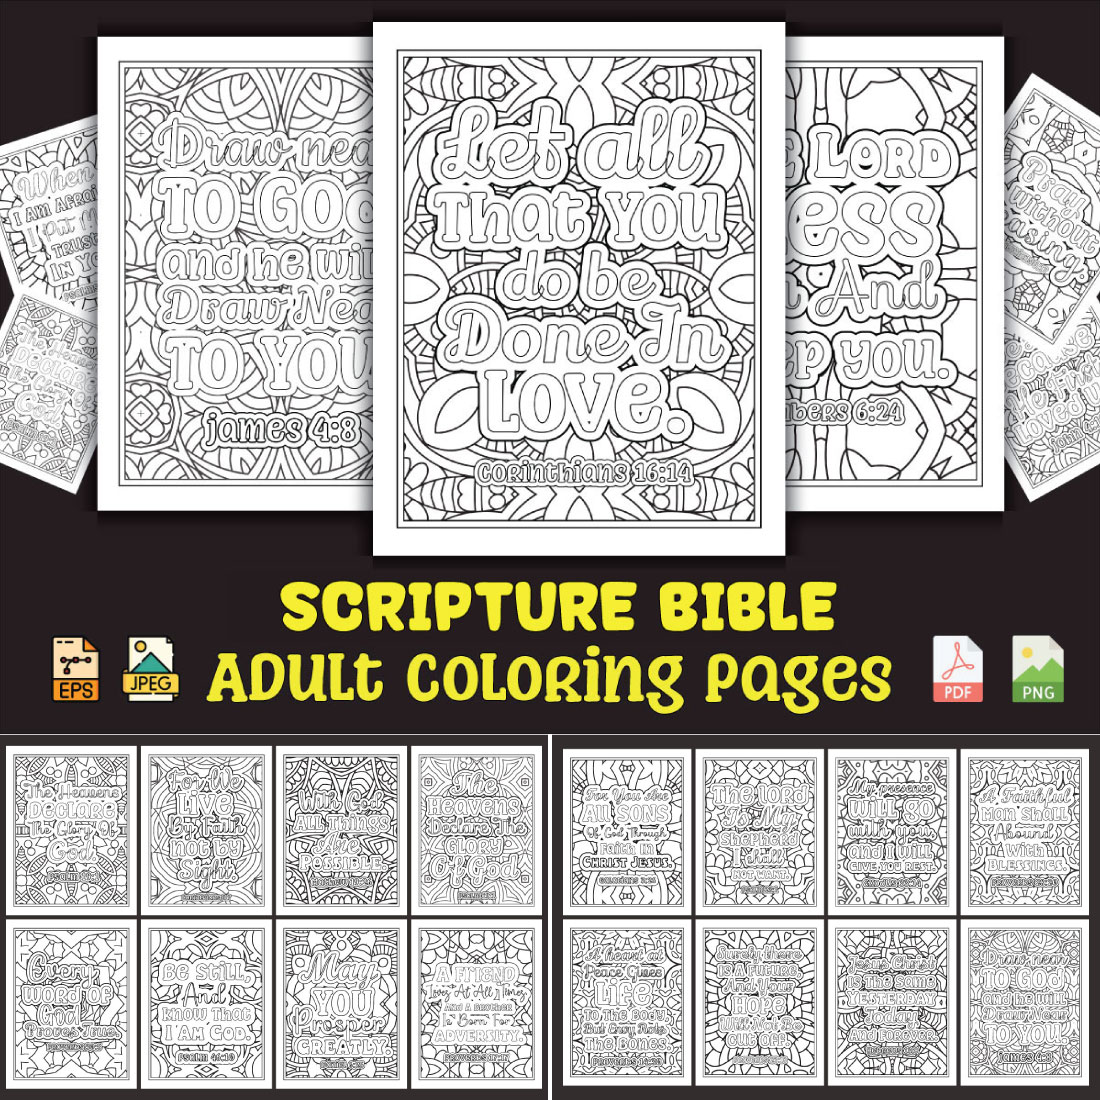 books of the bible coloring pages